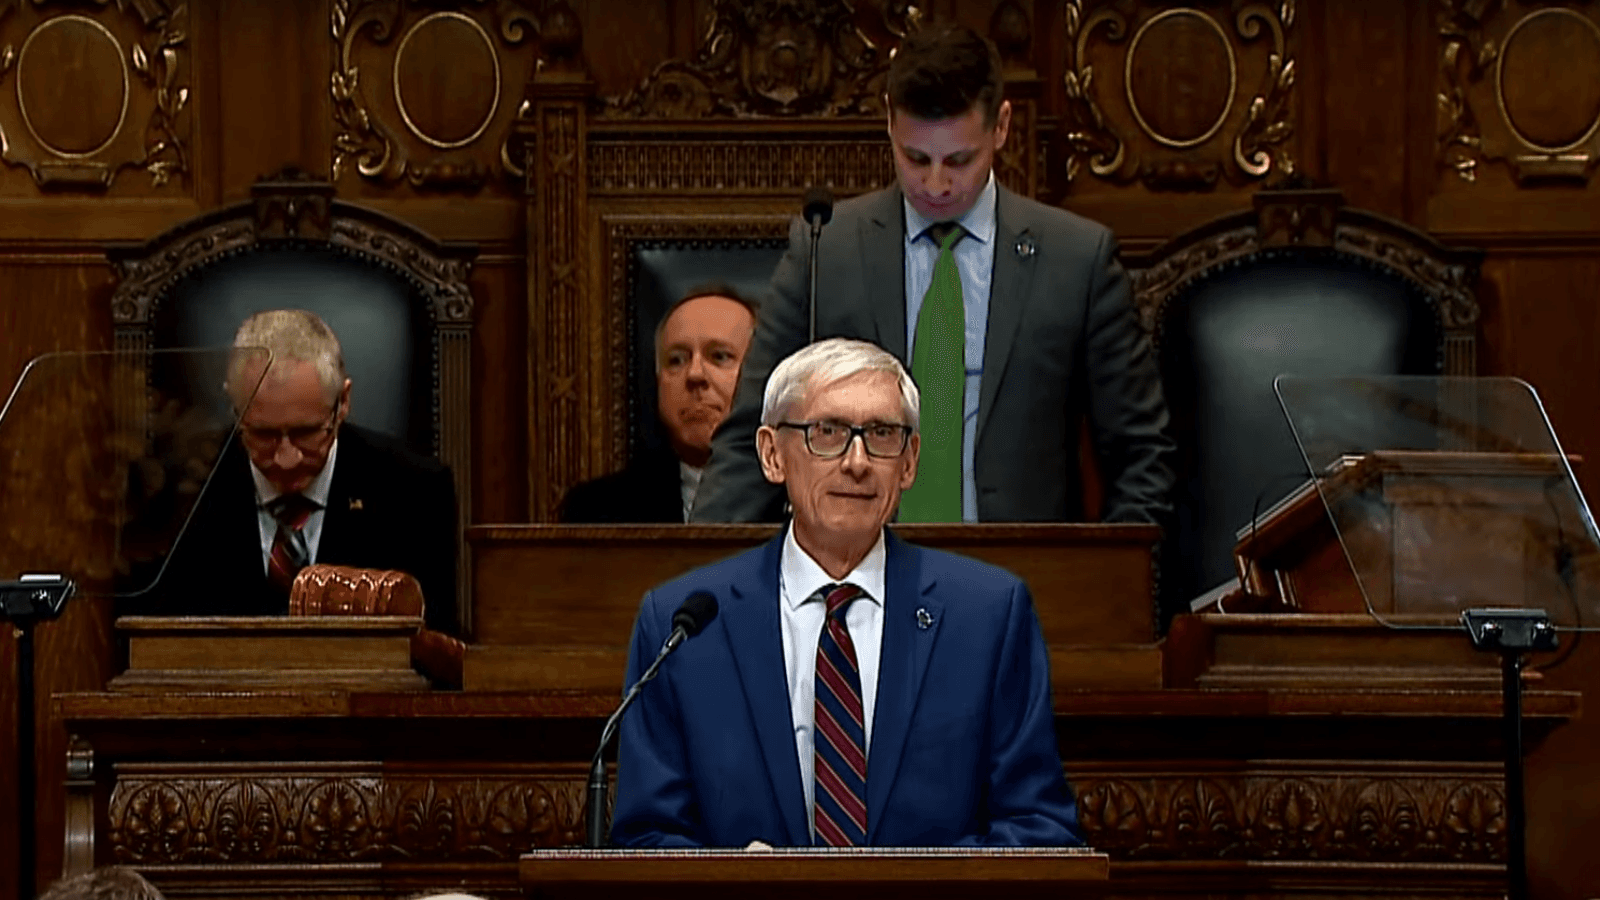 Evers touts state economy, promotes initiatives in State of the State address